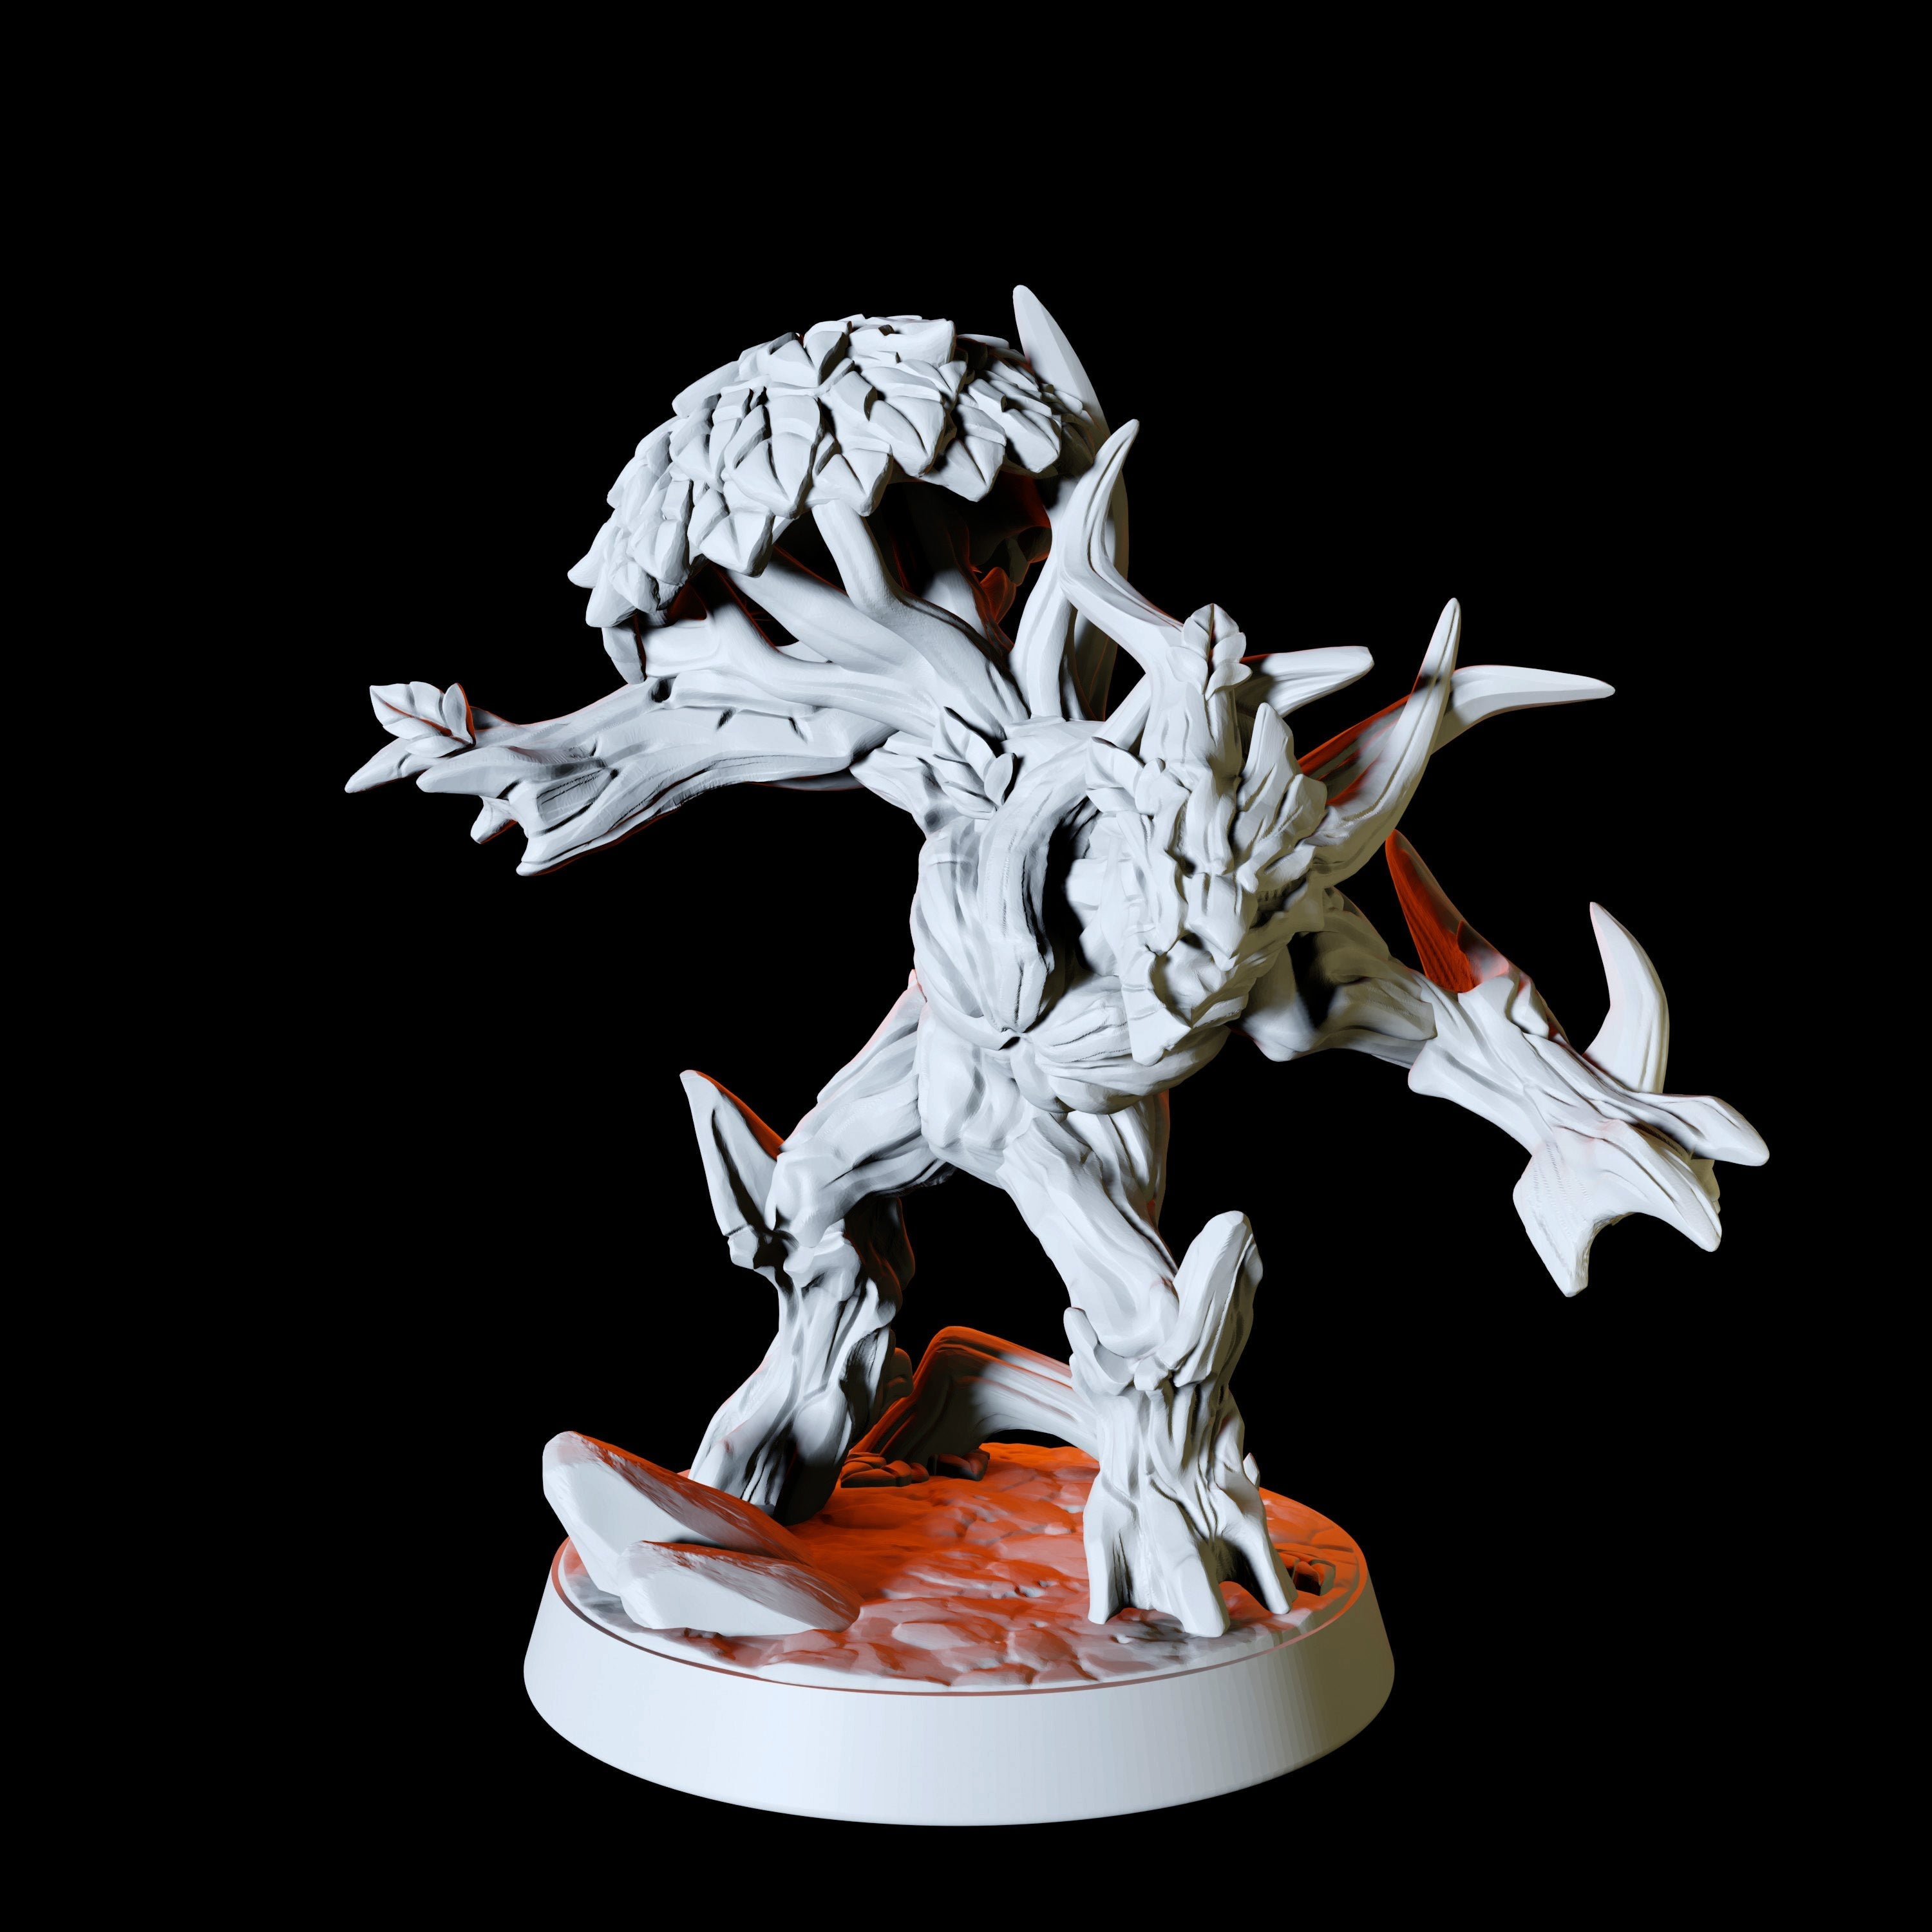 Two Twig Blight Miniatures for Dungeons and Dragons - Myth Forged